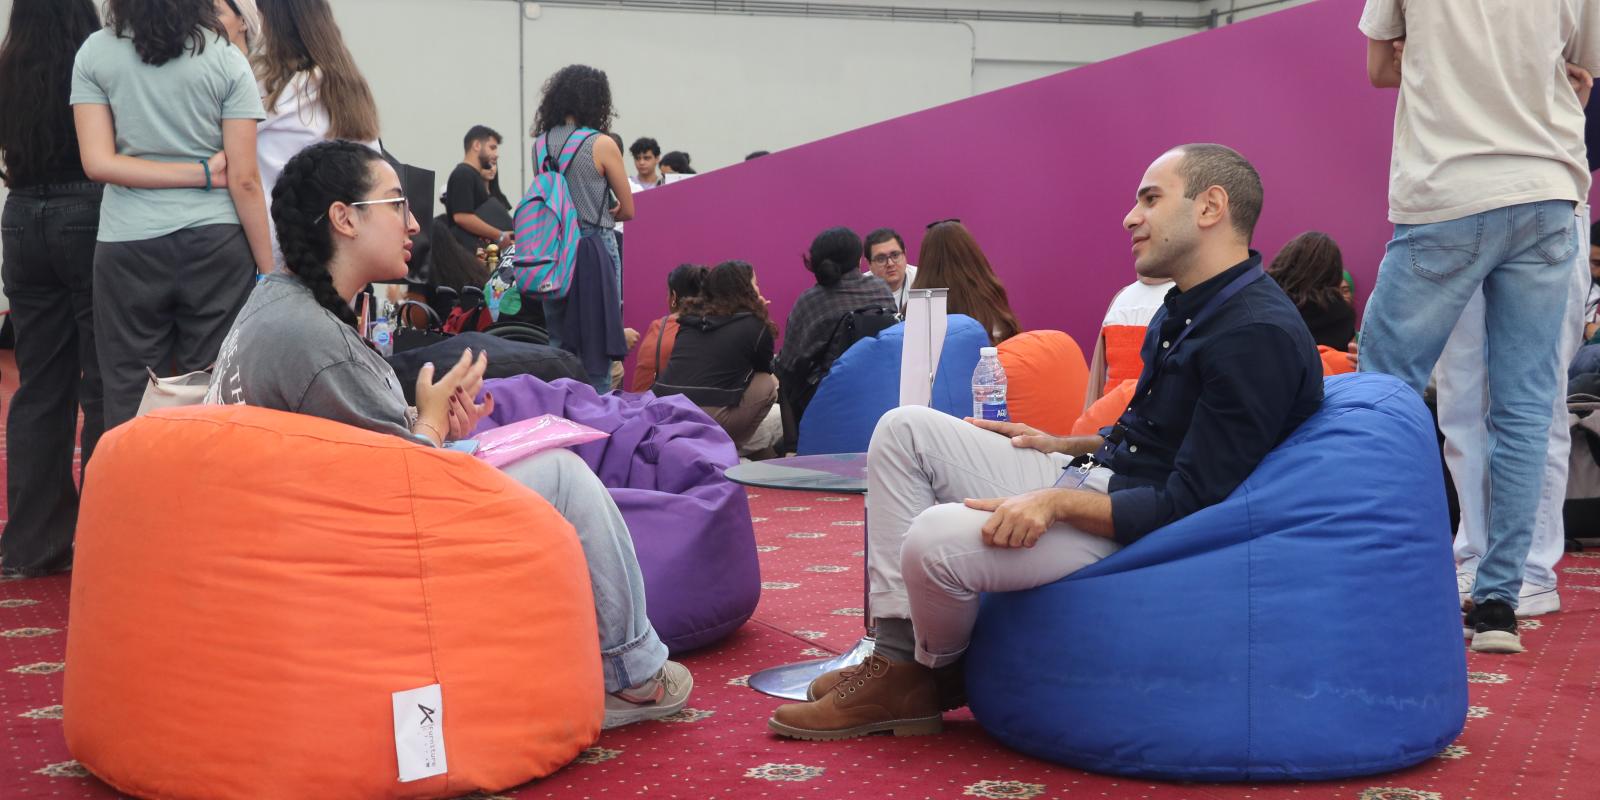 A girl and a boy talking to each other sitting on a bean bag